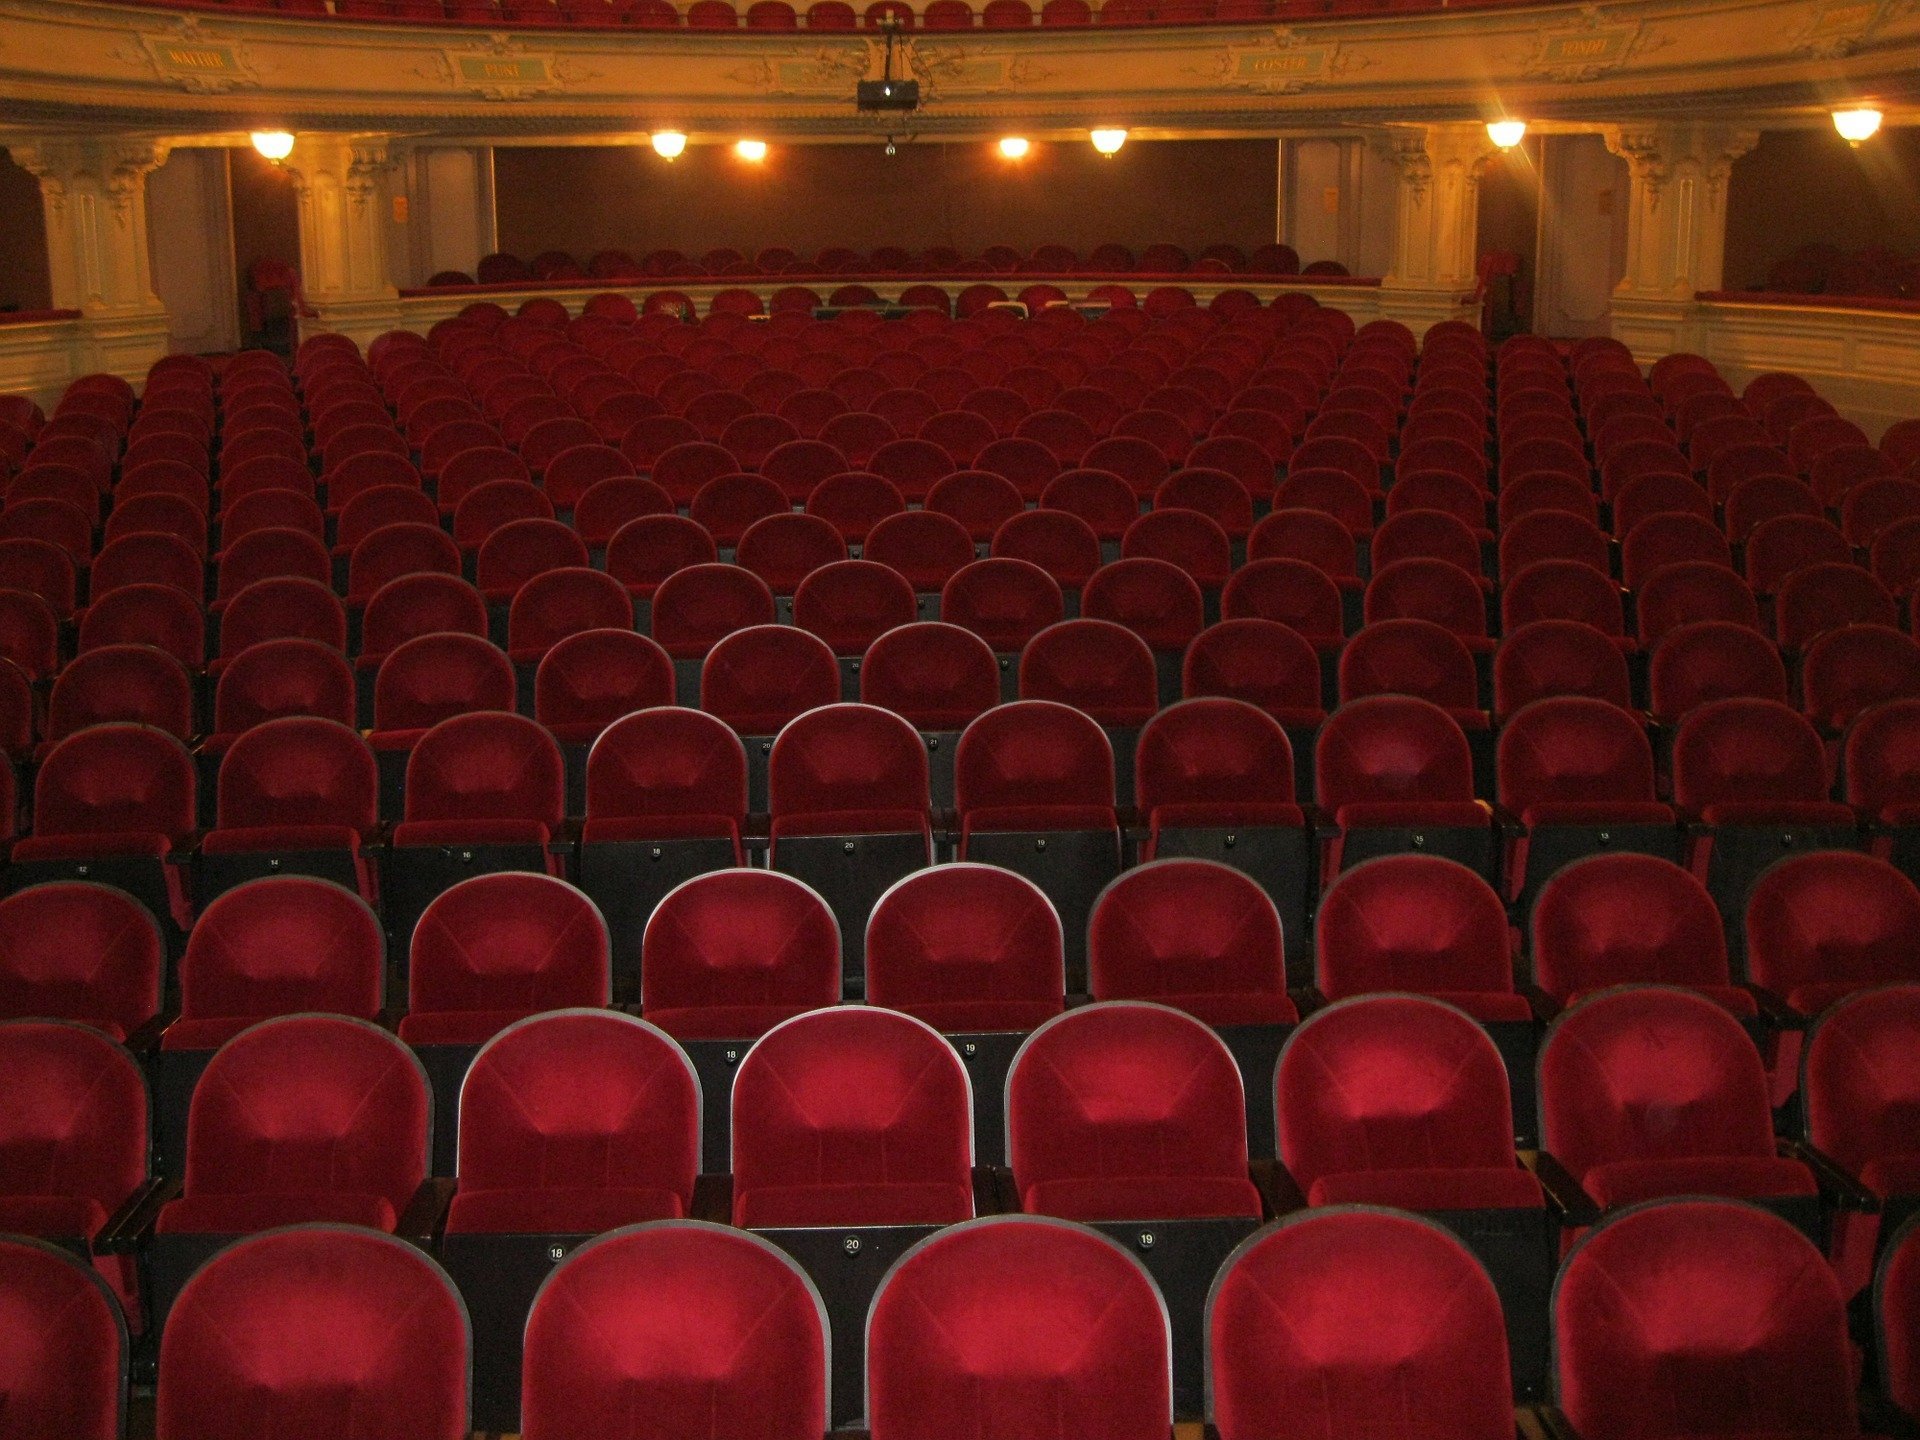 A theater of empty seats. | Source: Pixabay